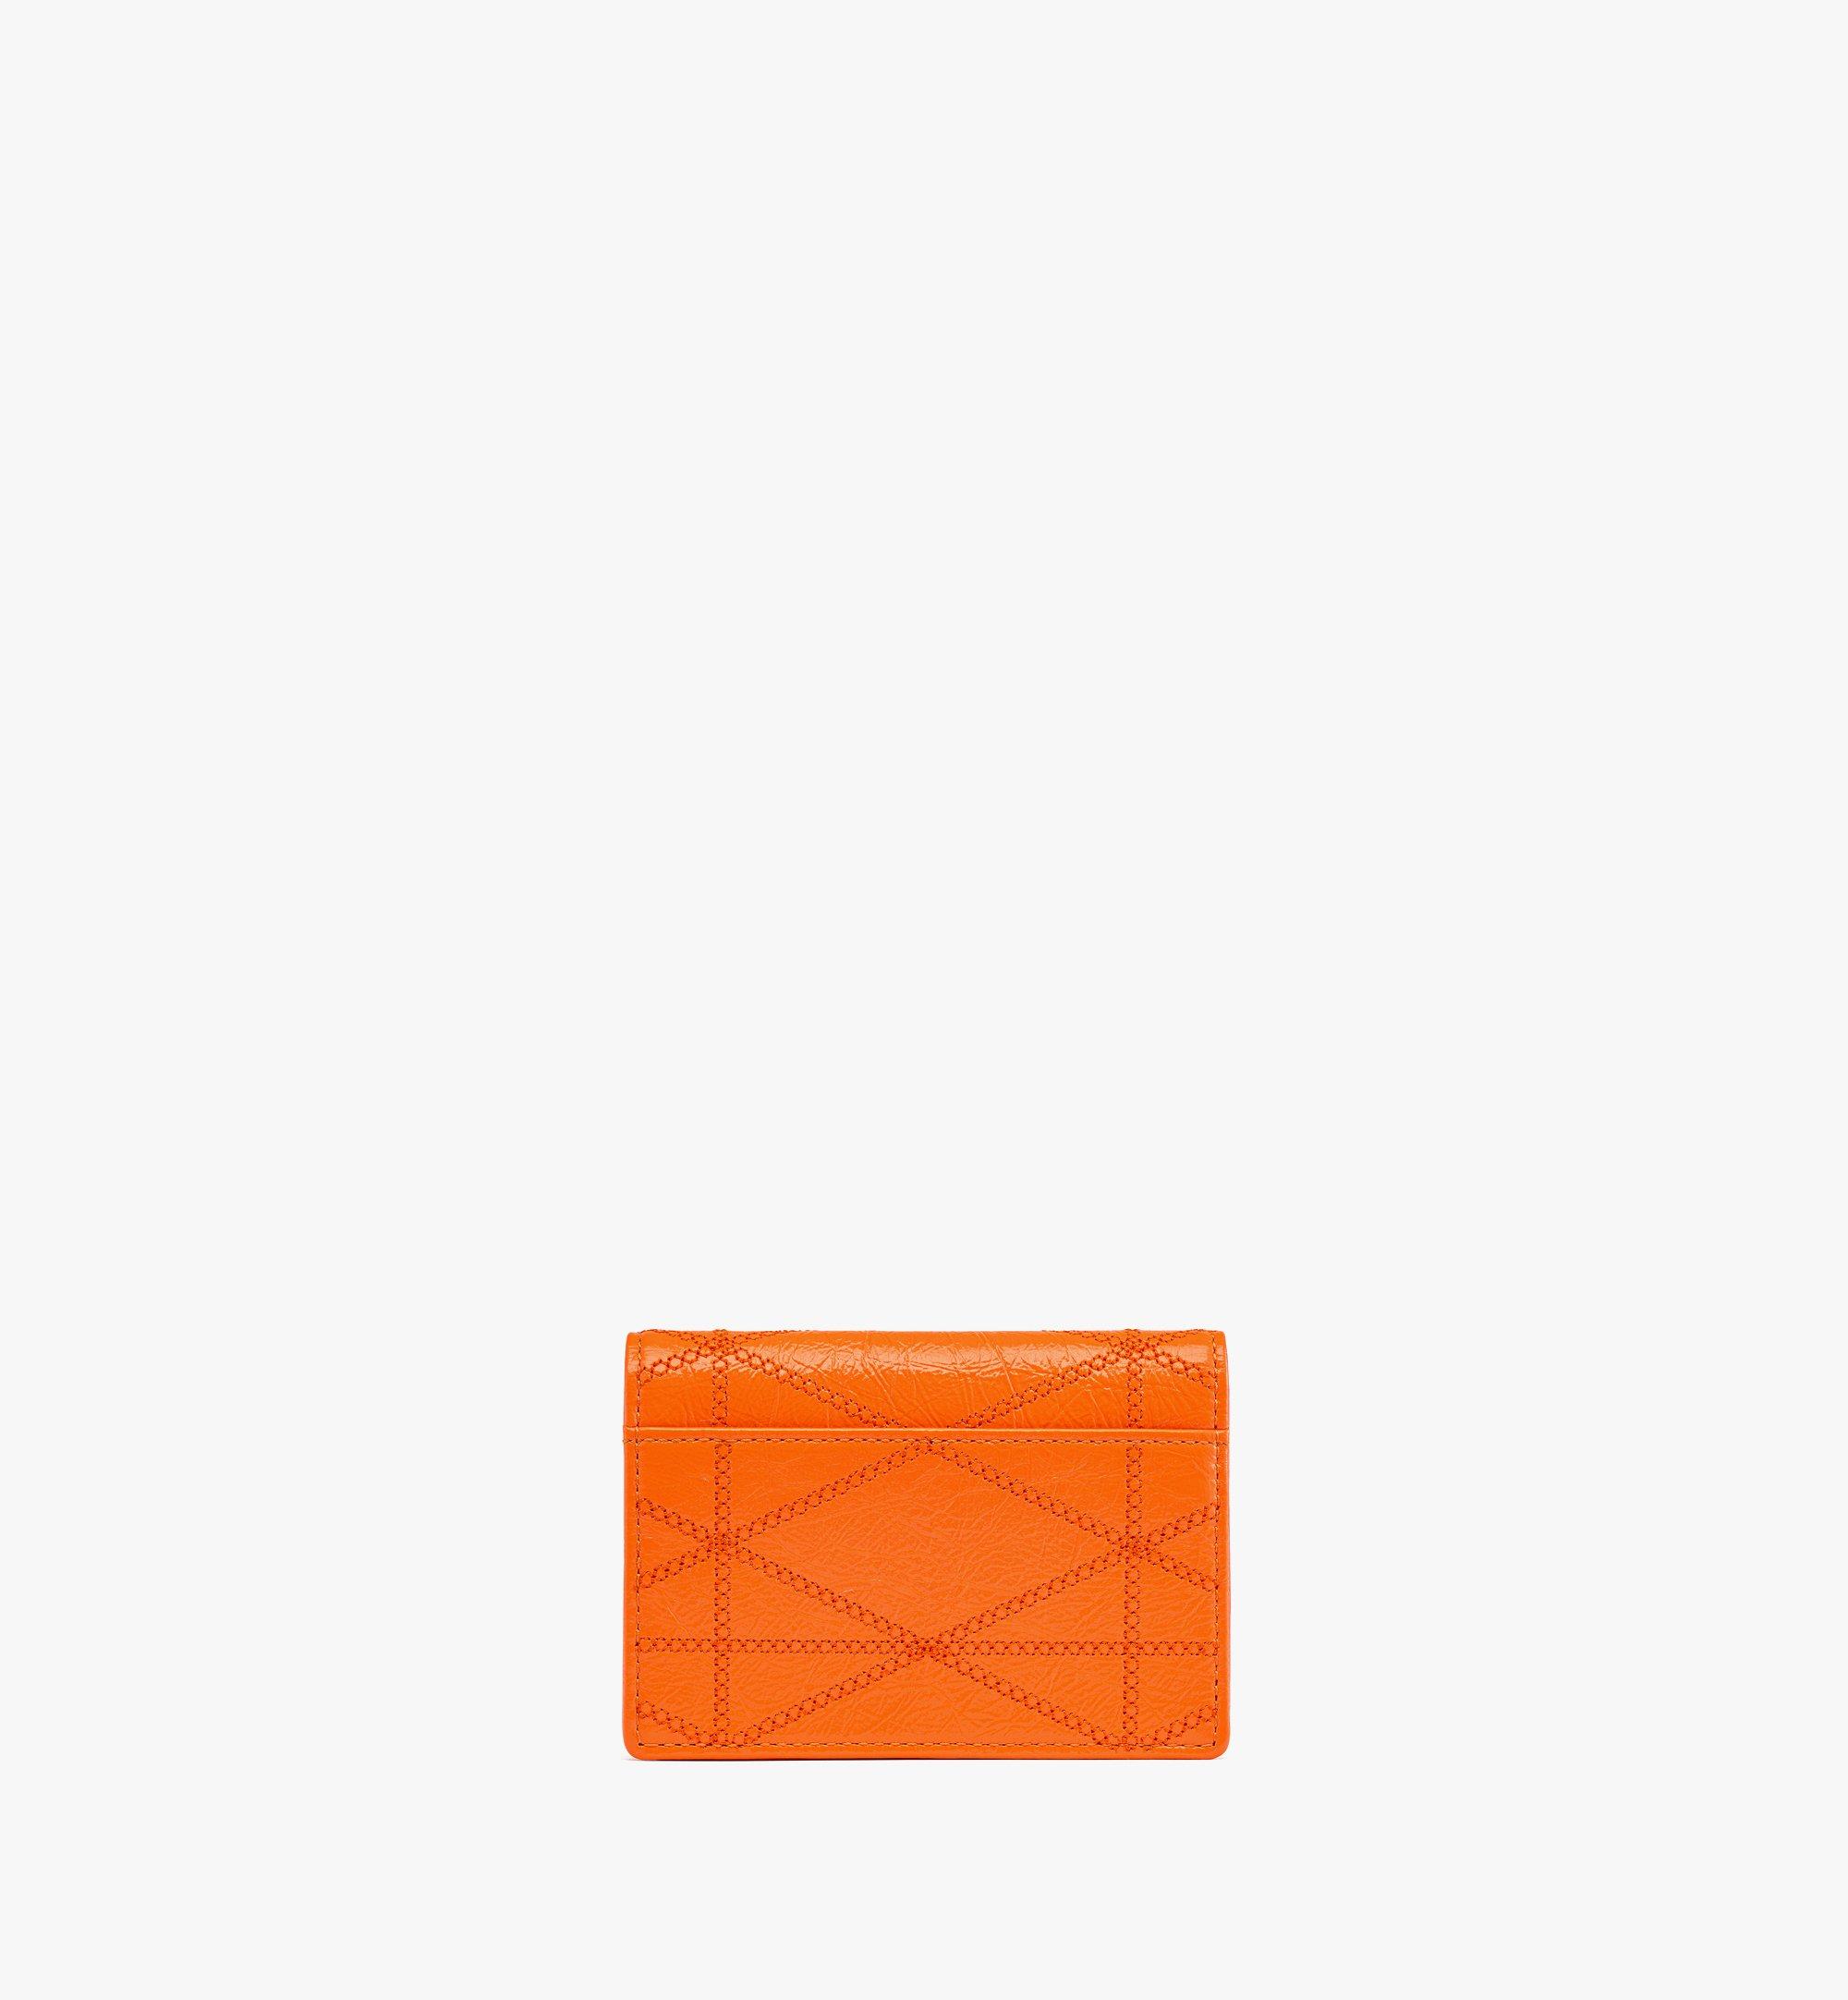 MCM Travia Quilted Card Wallet in Crushed Leather Orange MYADALM01O0001 Alternate View 2